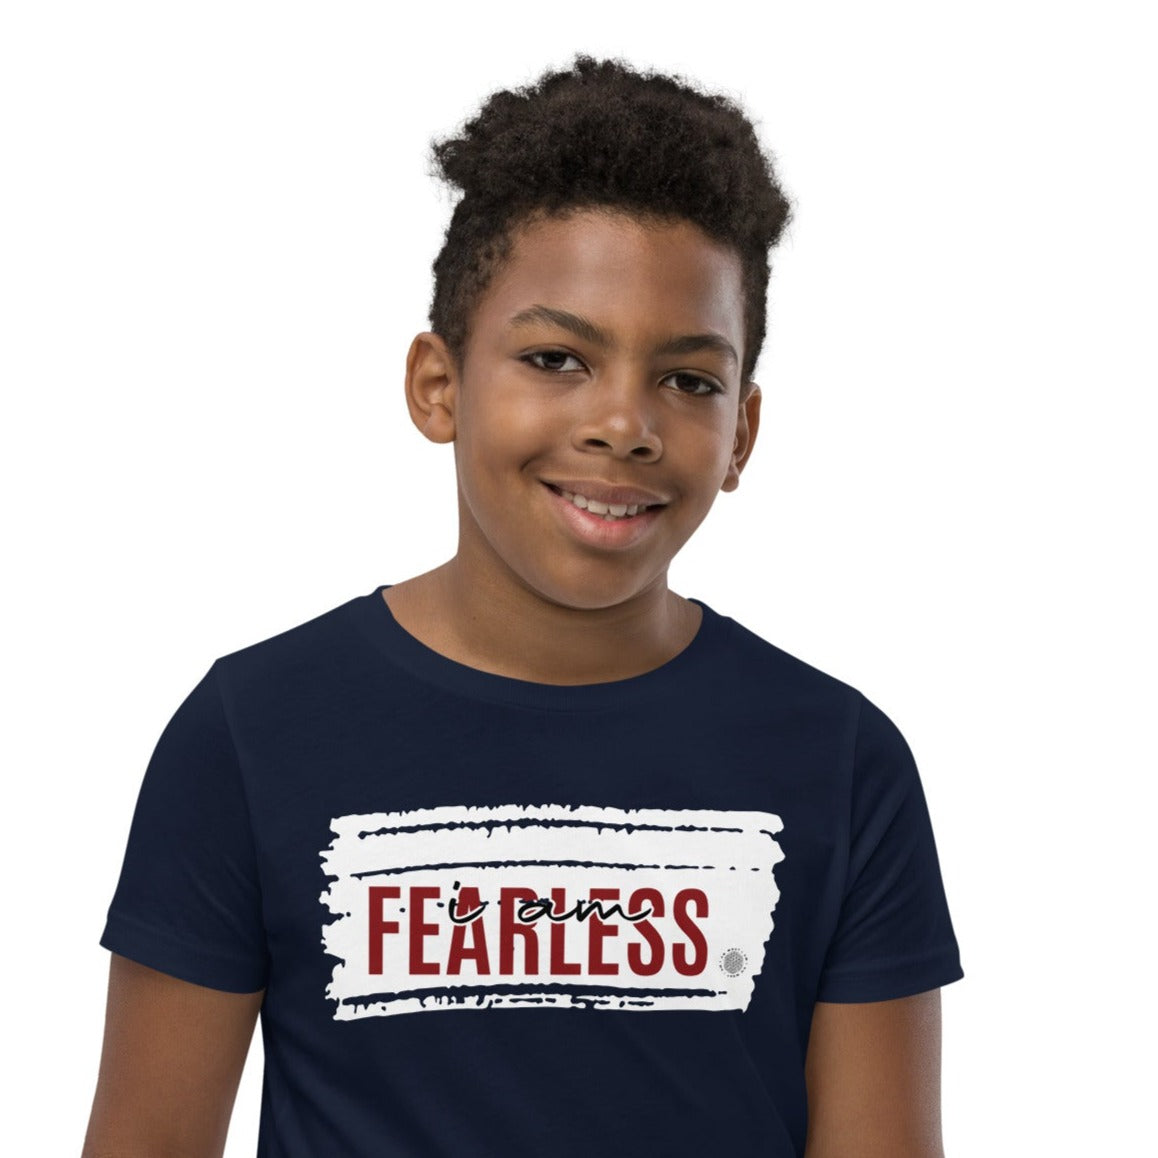 Our ‘I Am Fearless’ affirmation youth t-shirt describes your son or daughter who is set on rock climbing, snowboarding or joining the debate team. Your child has no fear. Motivational quotes build their confidence.